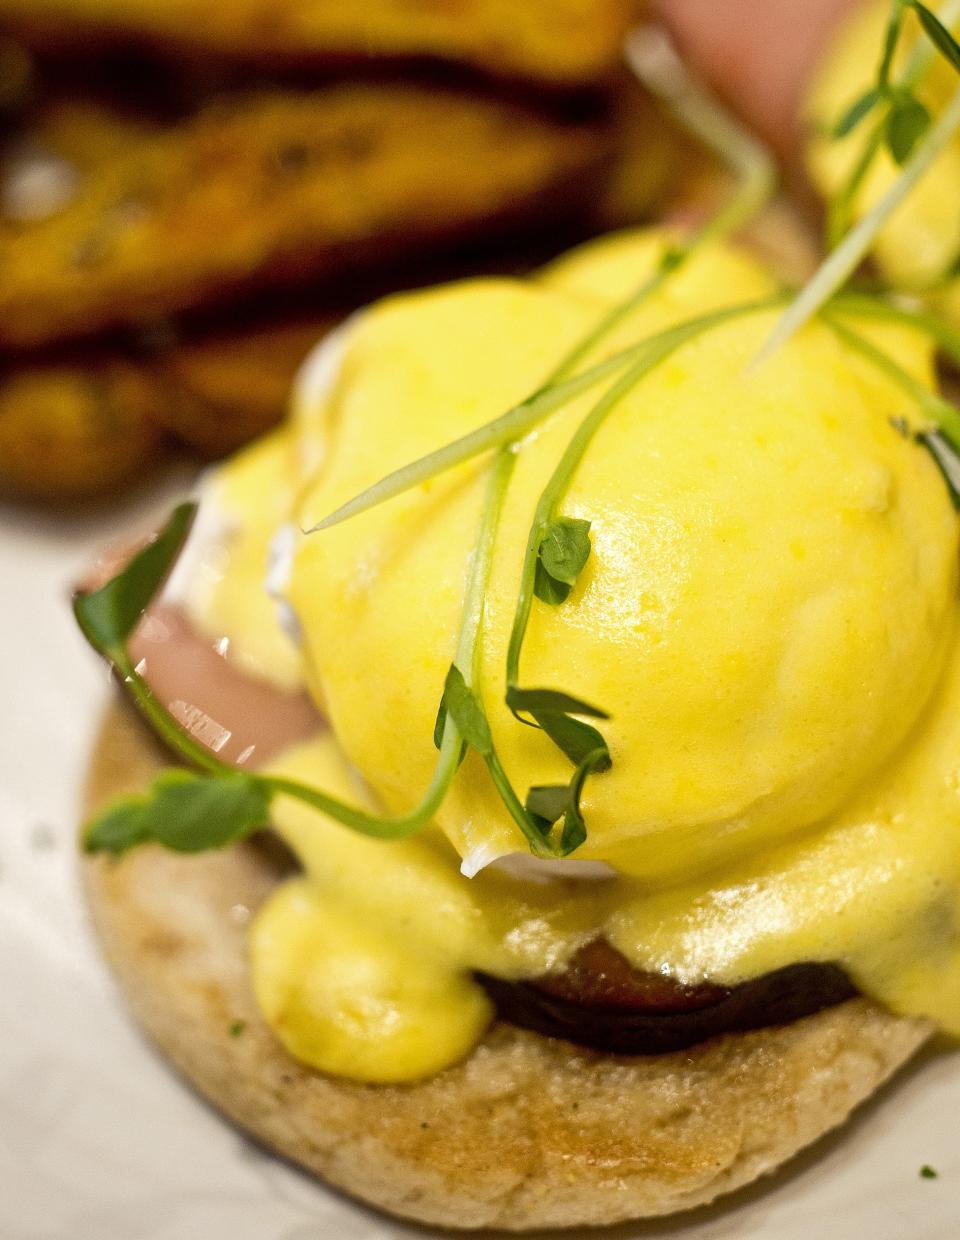 Eggs Benedict may be the most-common item on Easter-brunch menus this season.